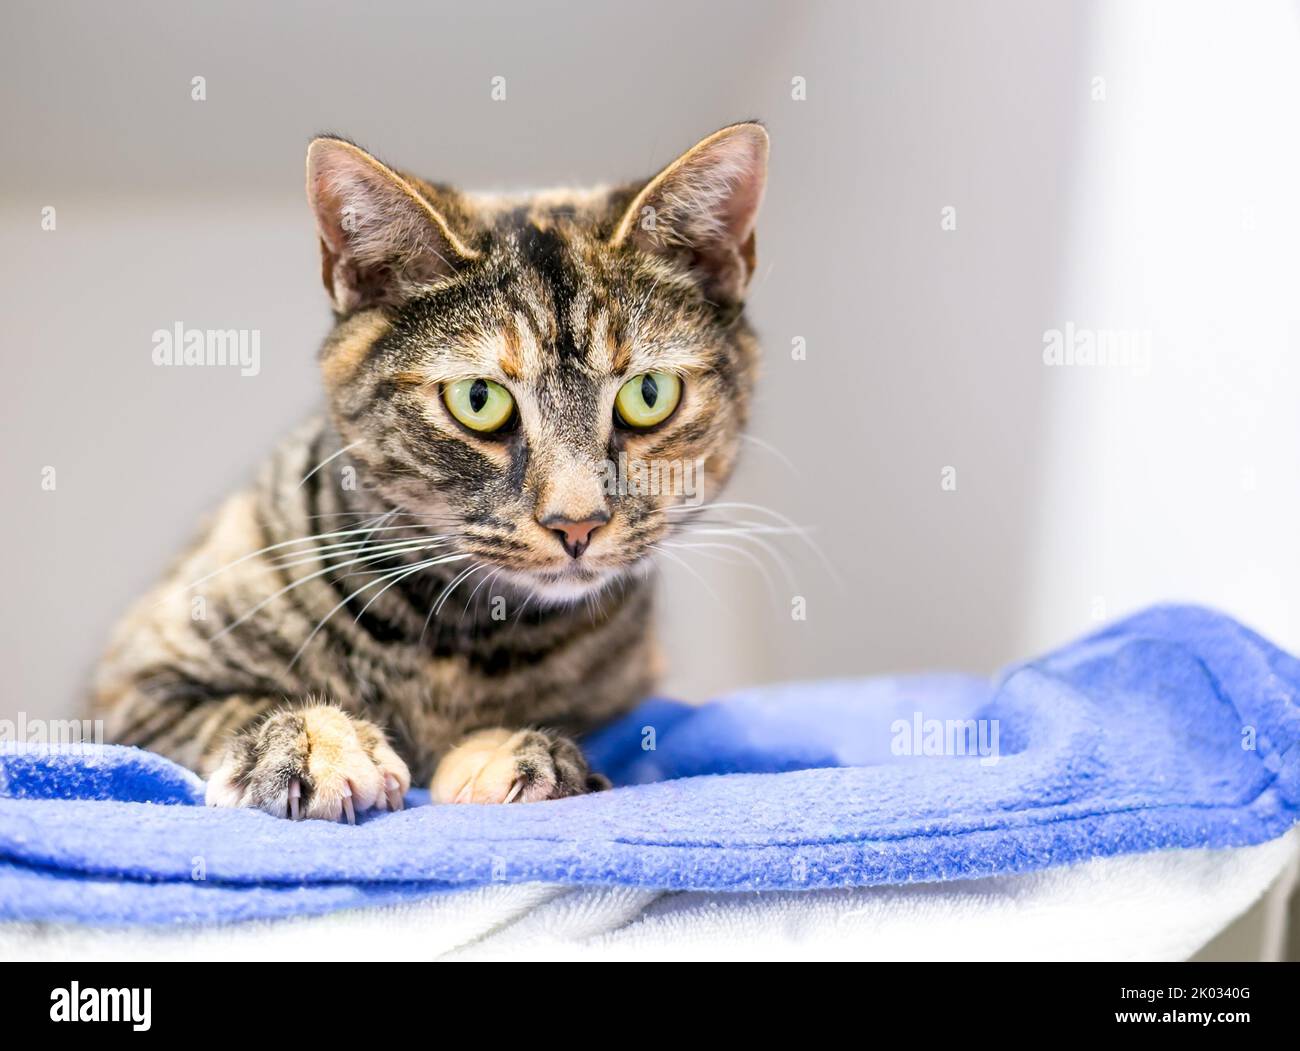 A shorthair cat with patched tortoiseshell tabby markings lying on a blanket and looking down Stock Photo